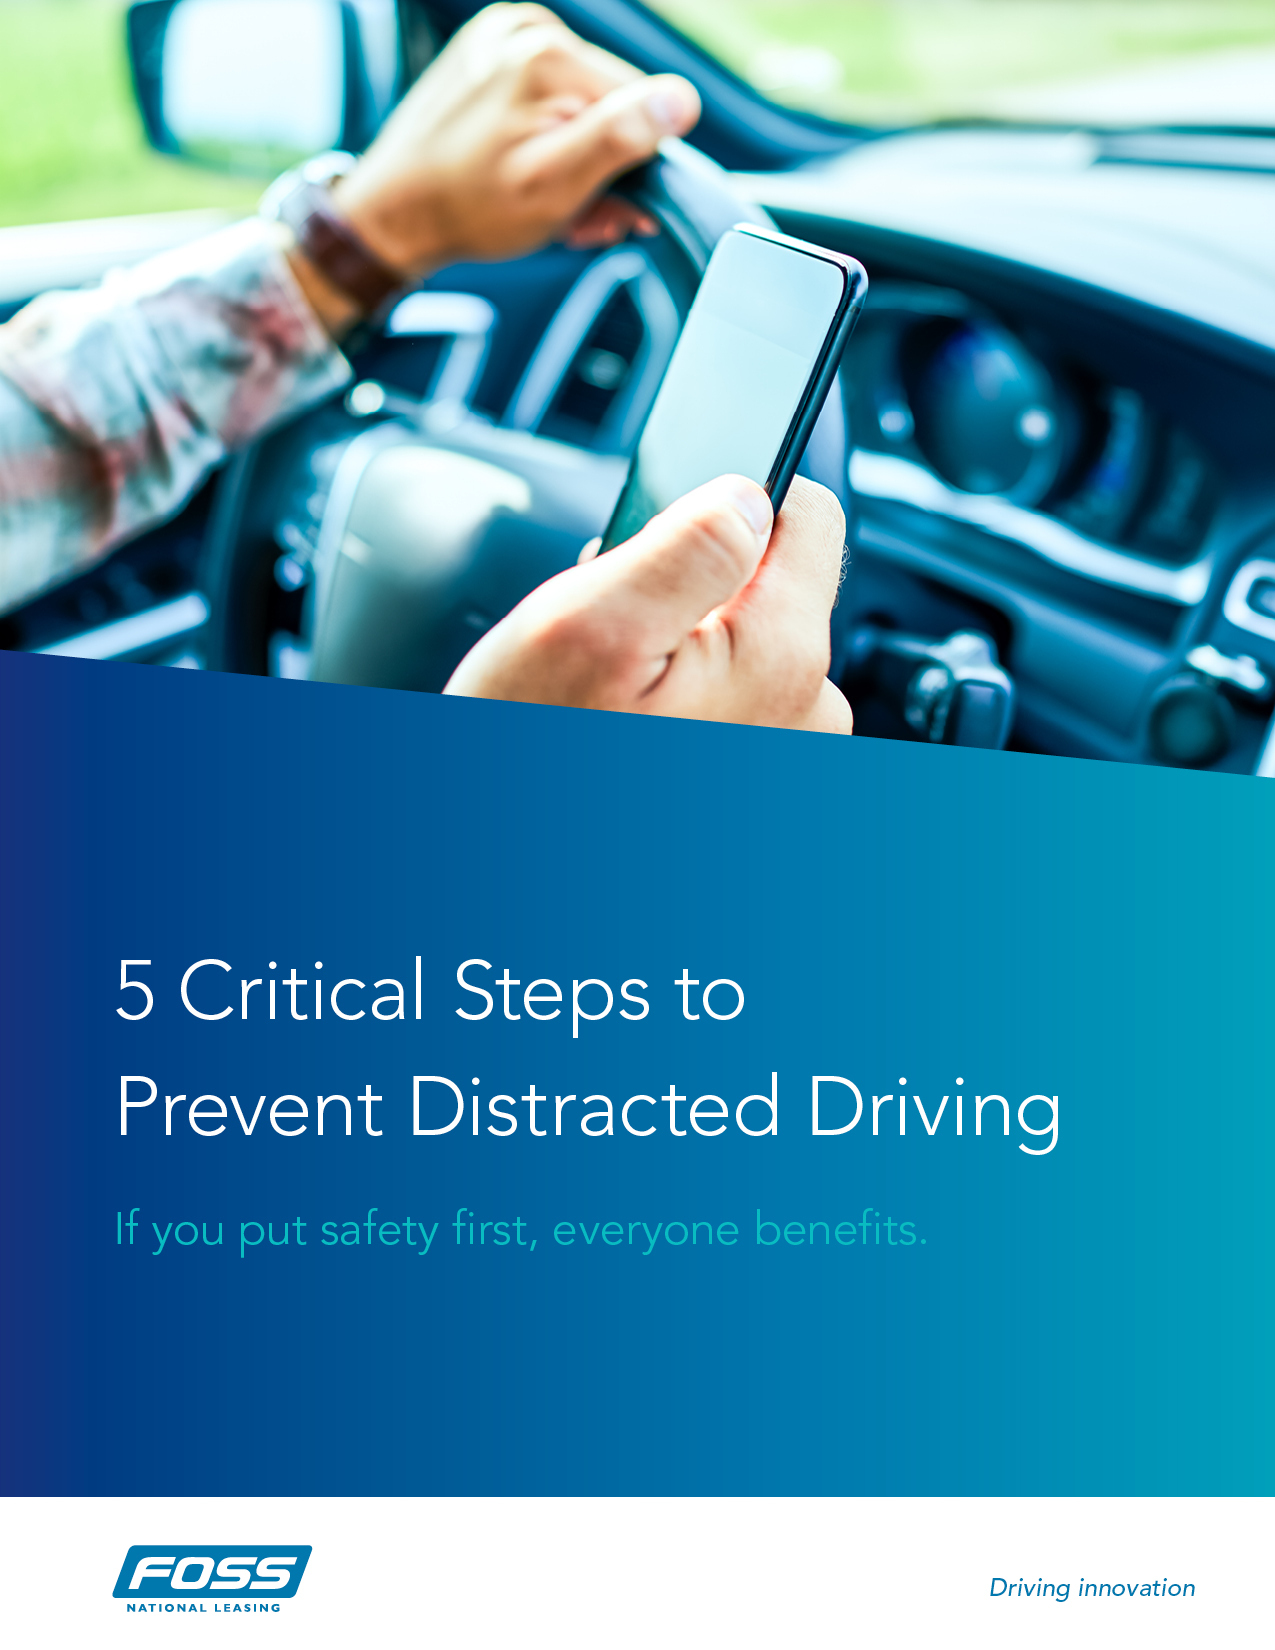 22227_FNL_5-Critical-Steps-Prevent-Distracted-Driving_2022 (1)